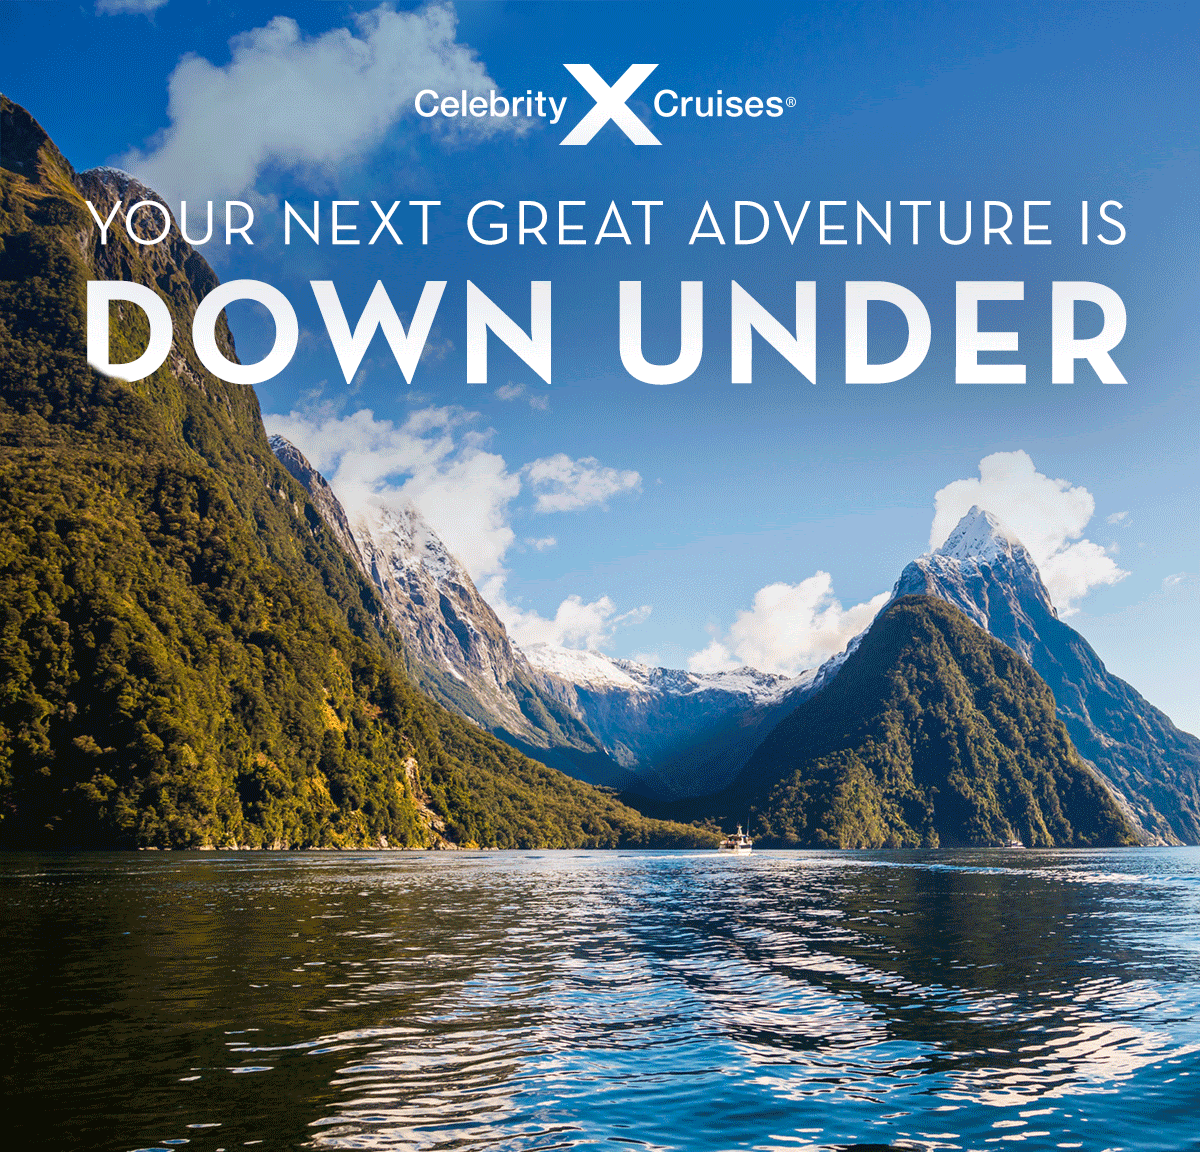 YOUR NEXT GREAT ADVENTURE IS DOWN UNDER